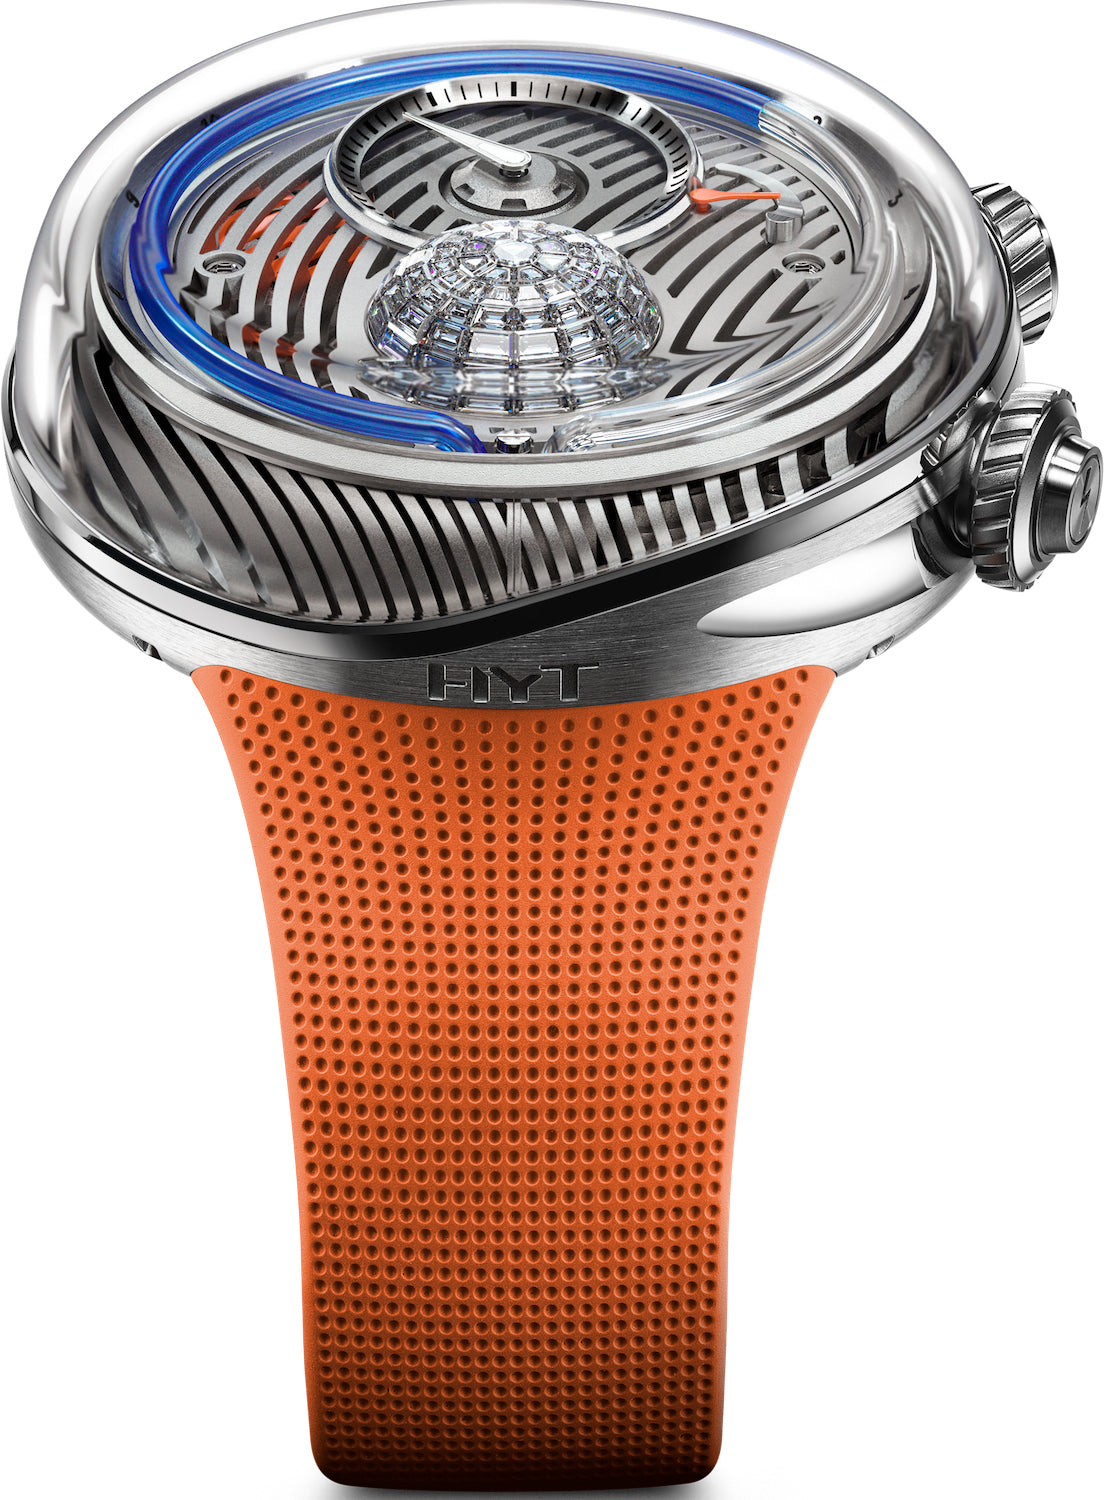 Hyt Watch Flow Eternity Limited Edition